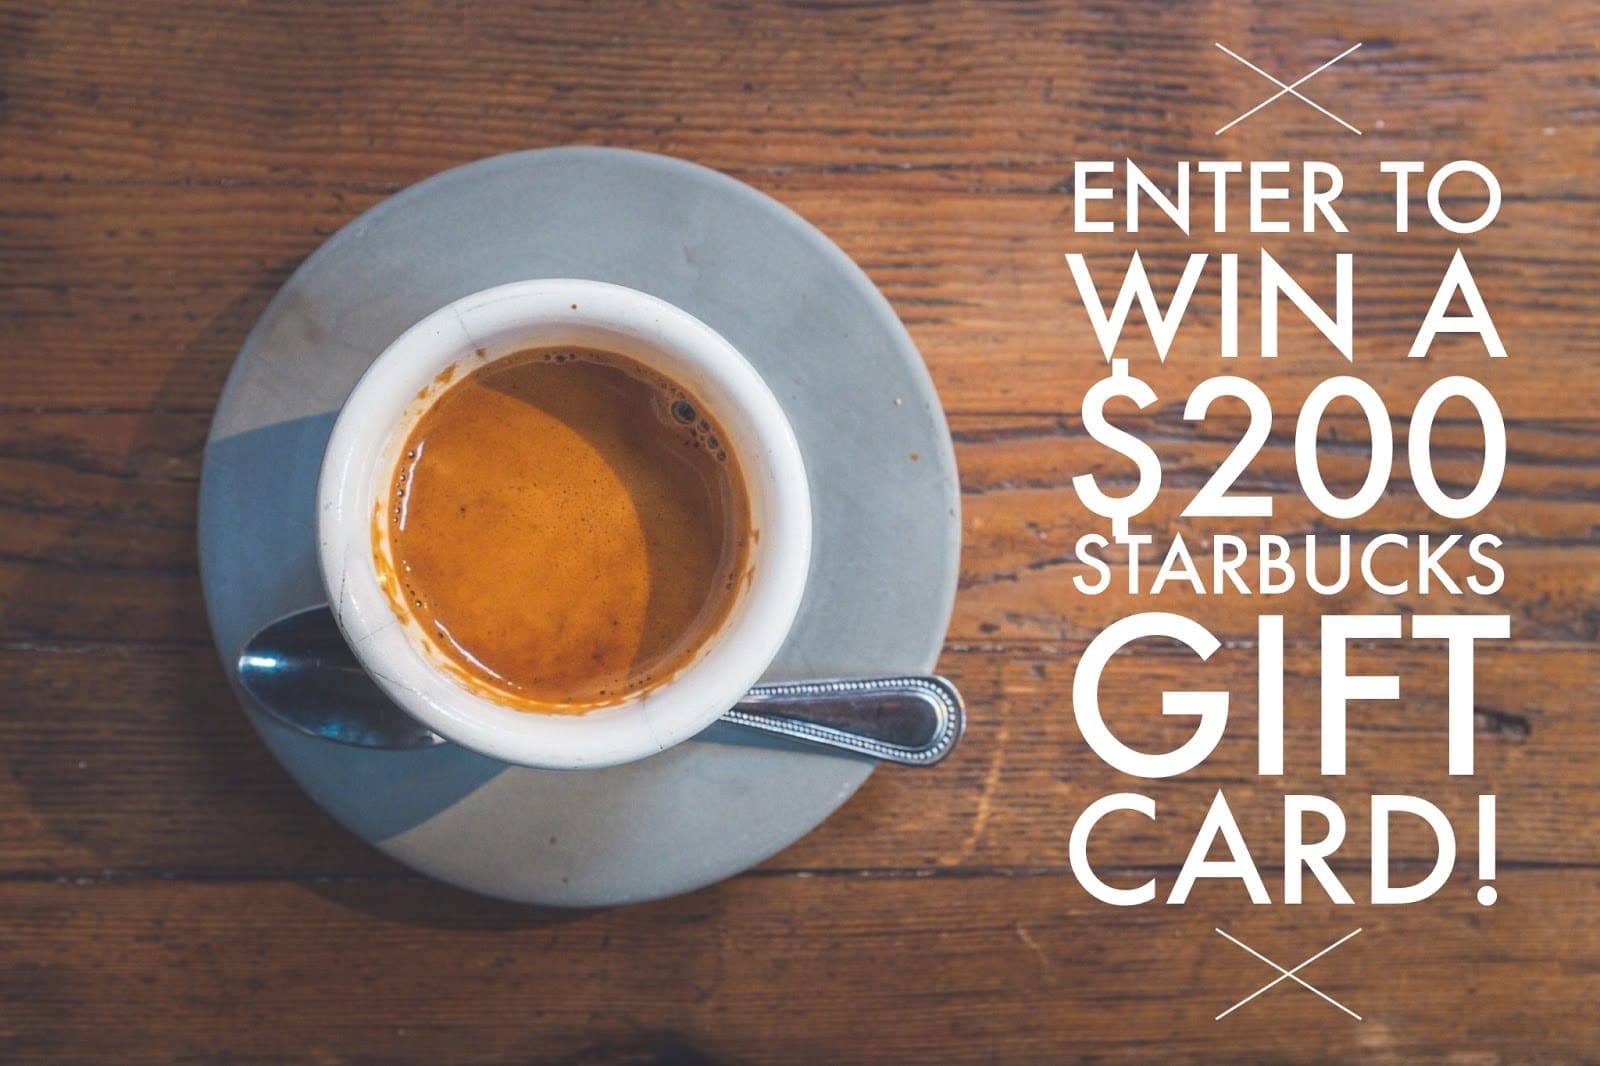 Starbucks gift card giveaway clip art